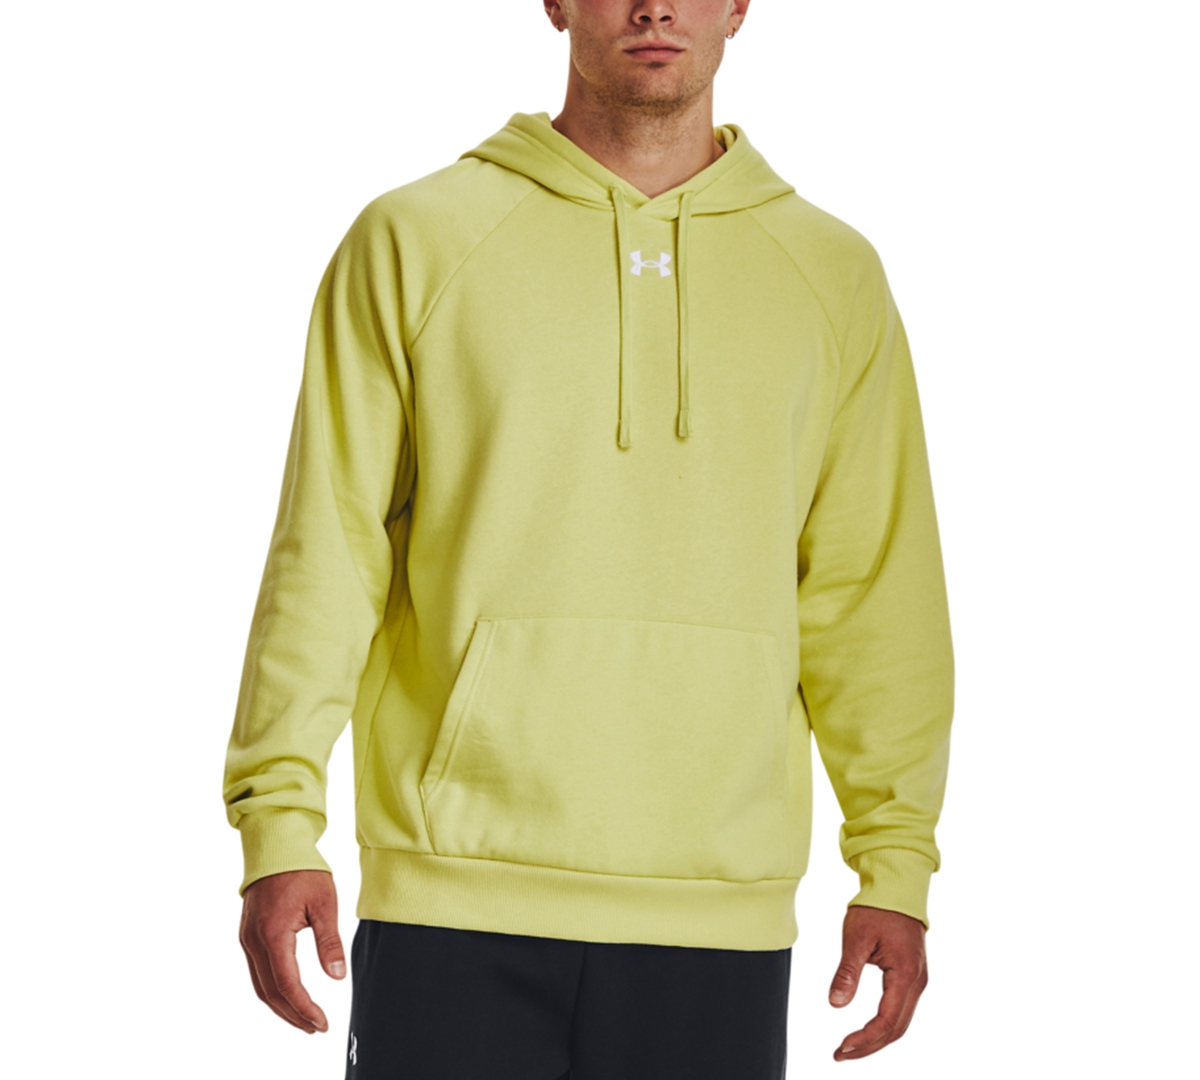 Under Armour Men's Rival Logo Embroidered Fleece Hoodie In Flashlight,wht